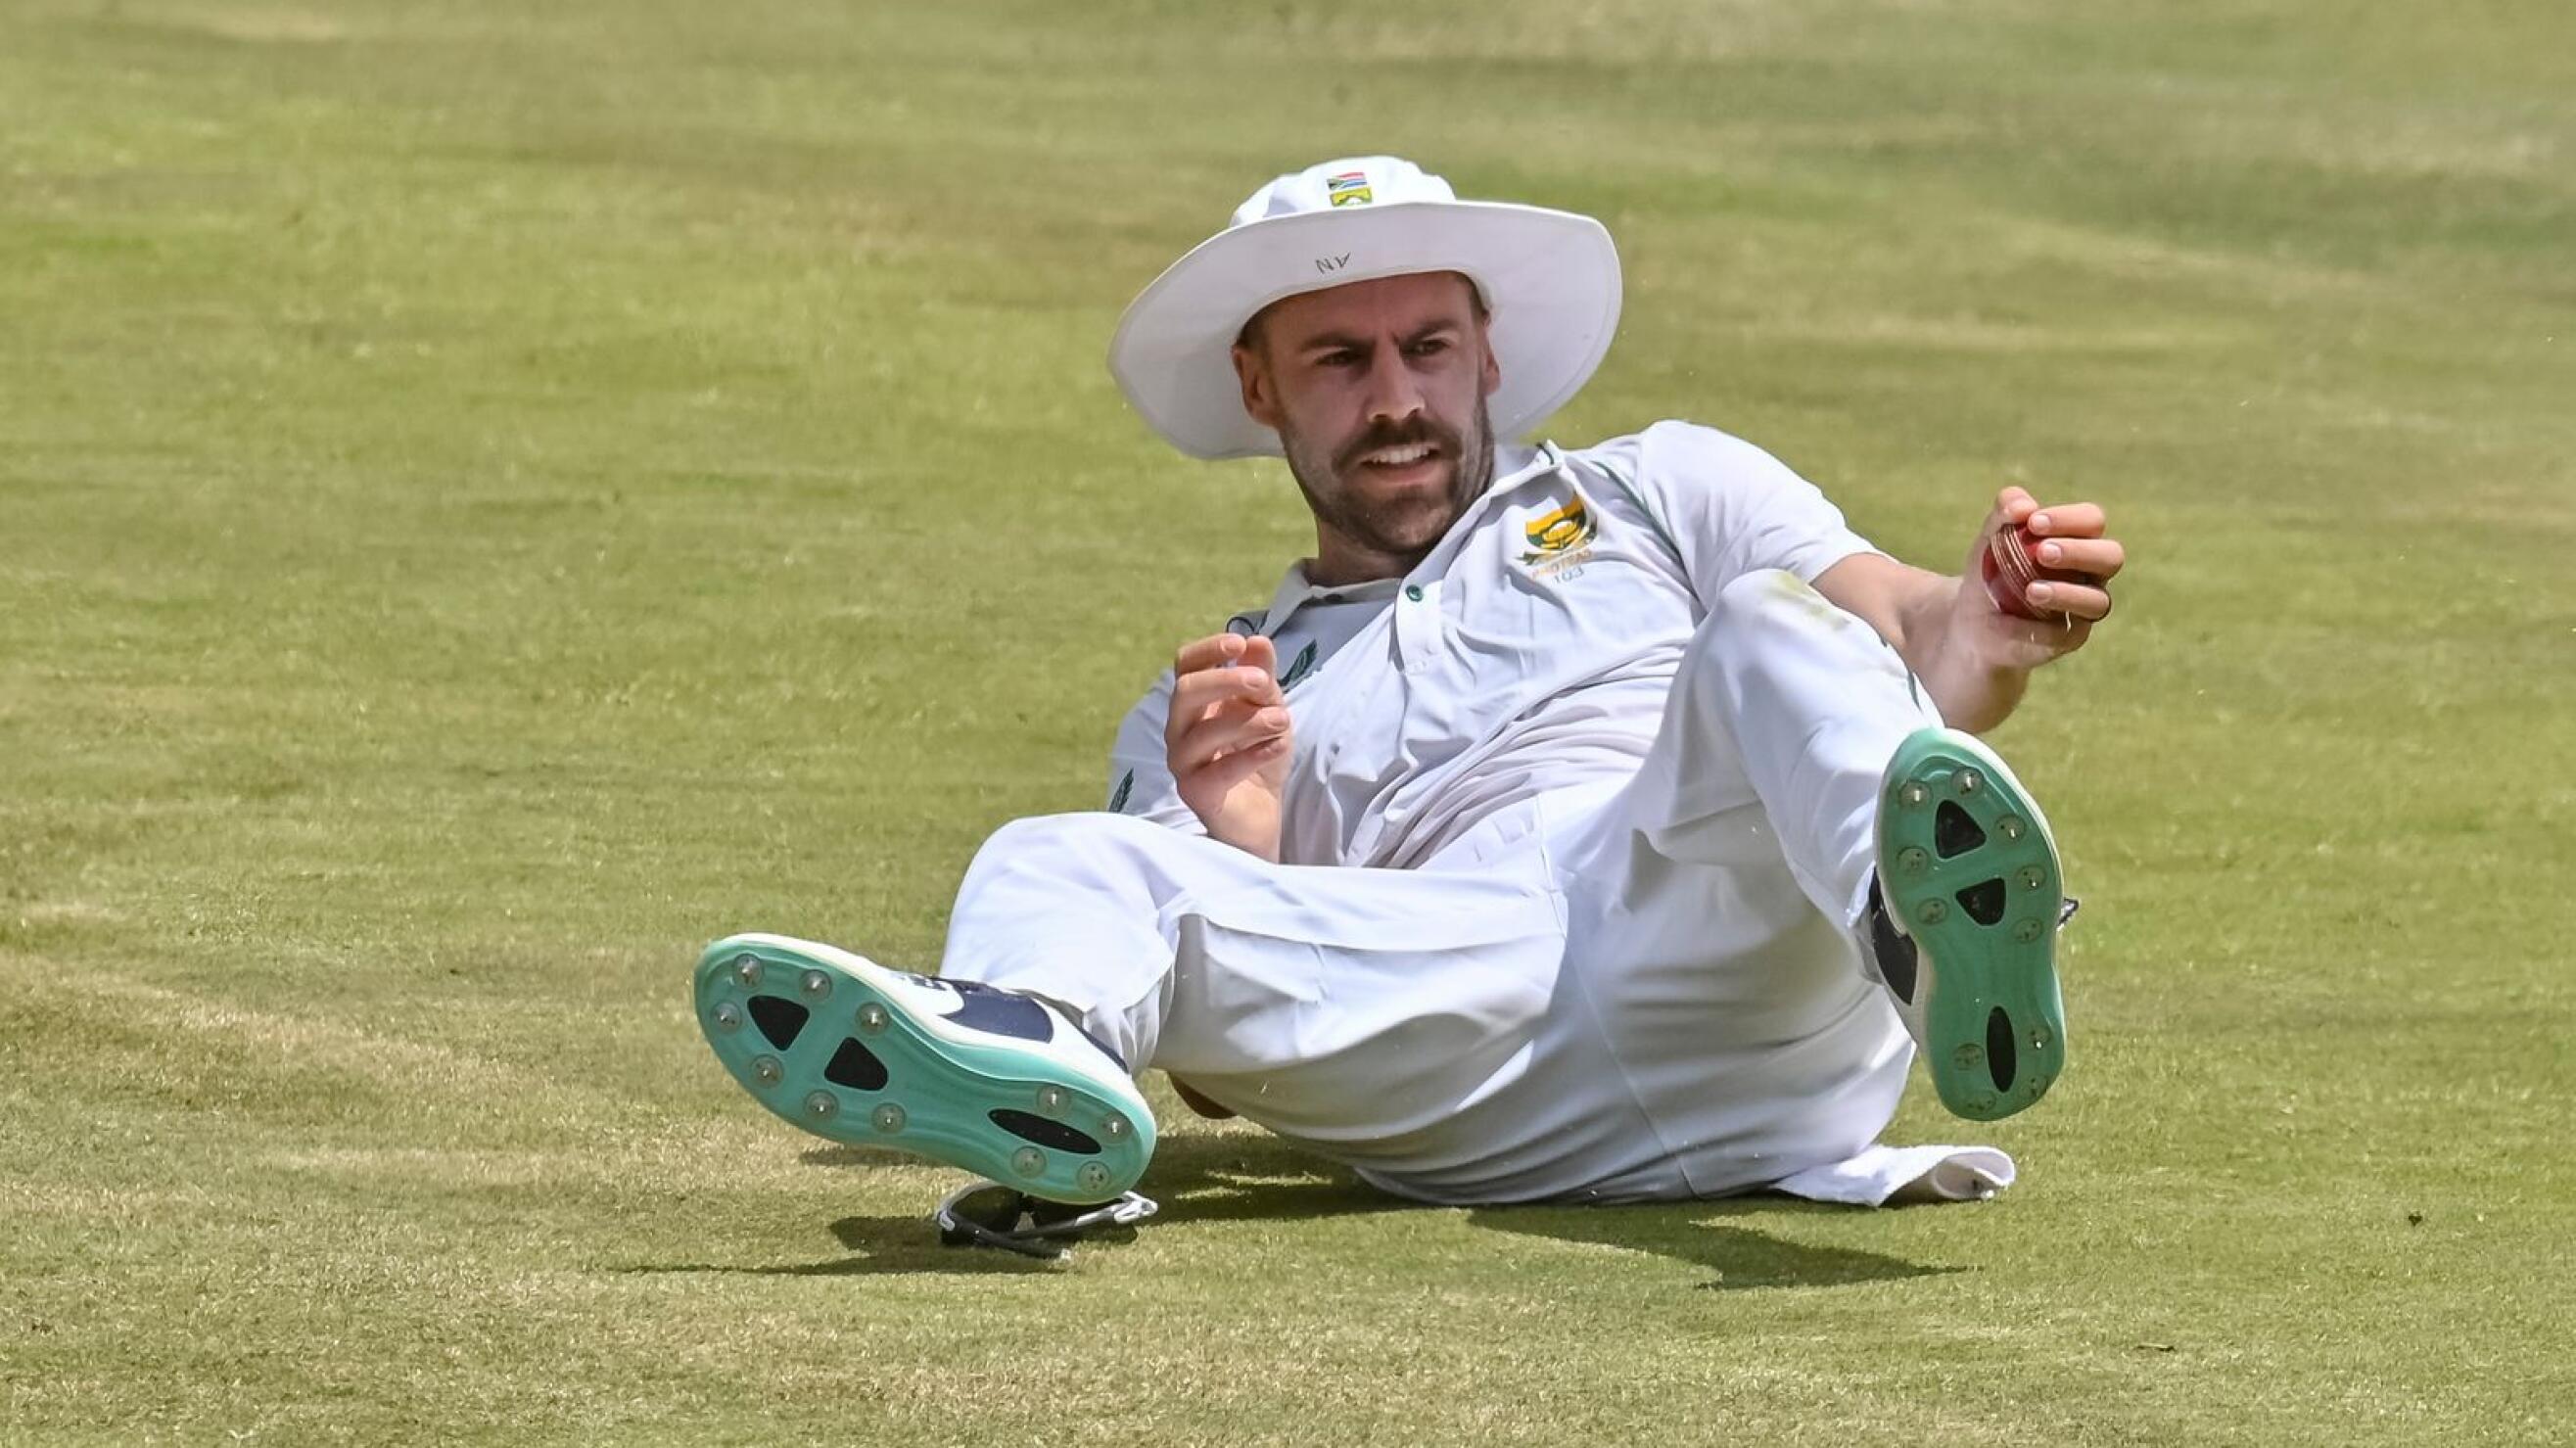 Proteas fast bowler Anrich Nortje fields a ball during a Test match